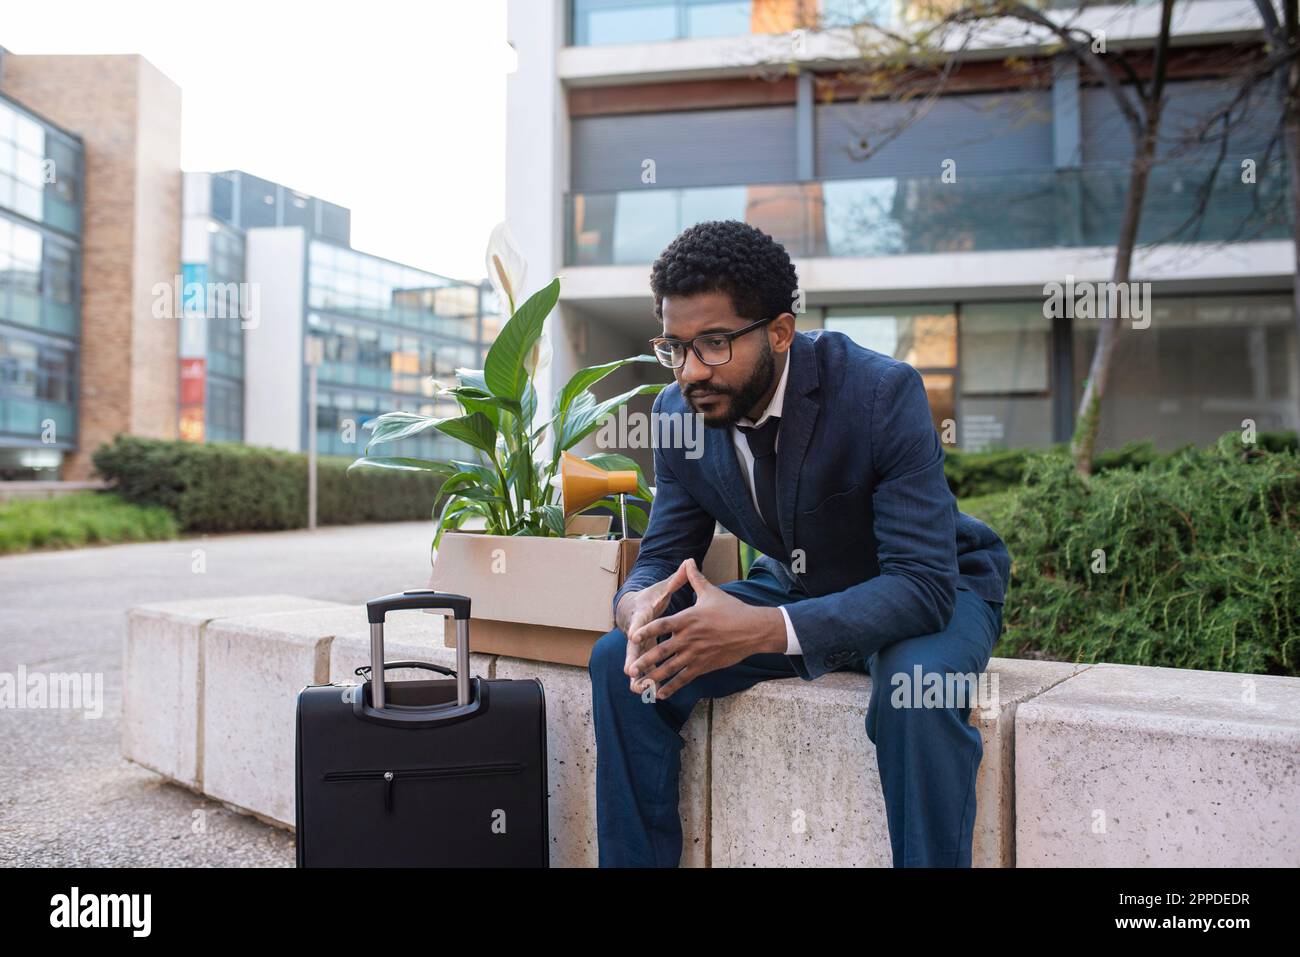 Depressed businessman with suitcase and his belongings sitting outside office building Stock Photo